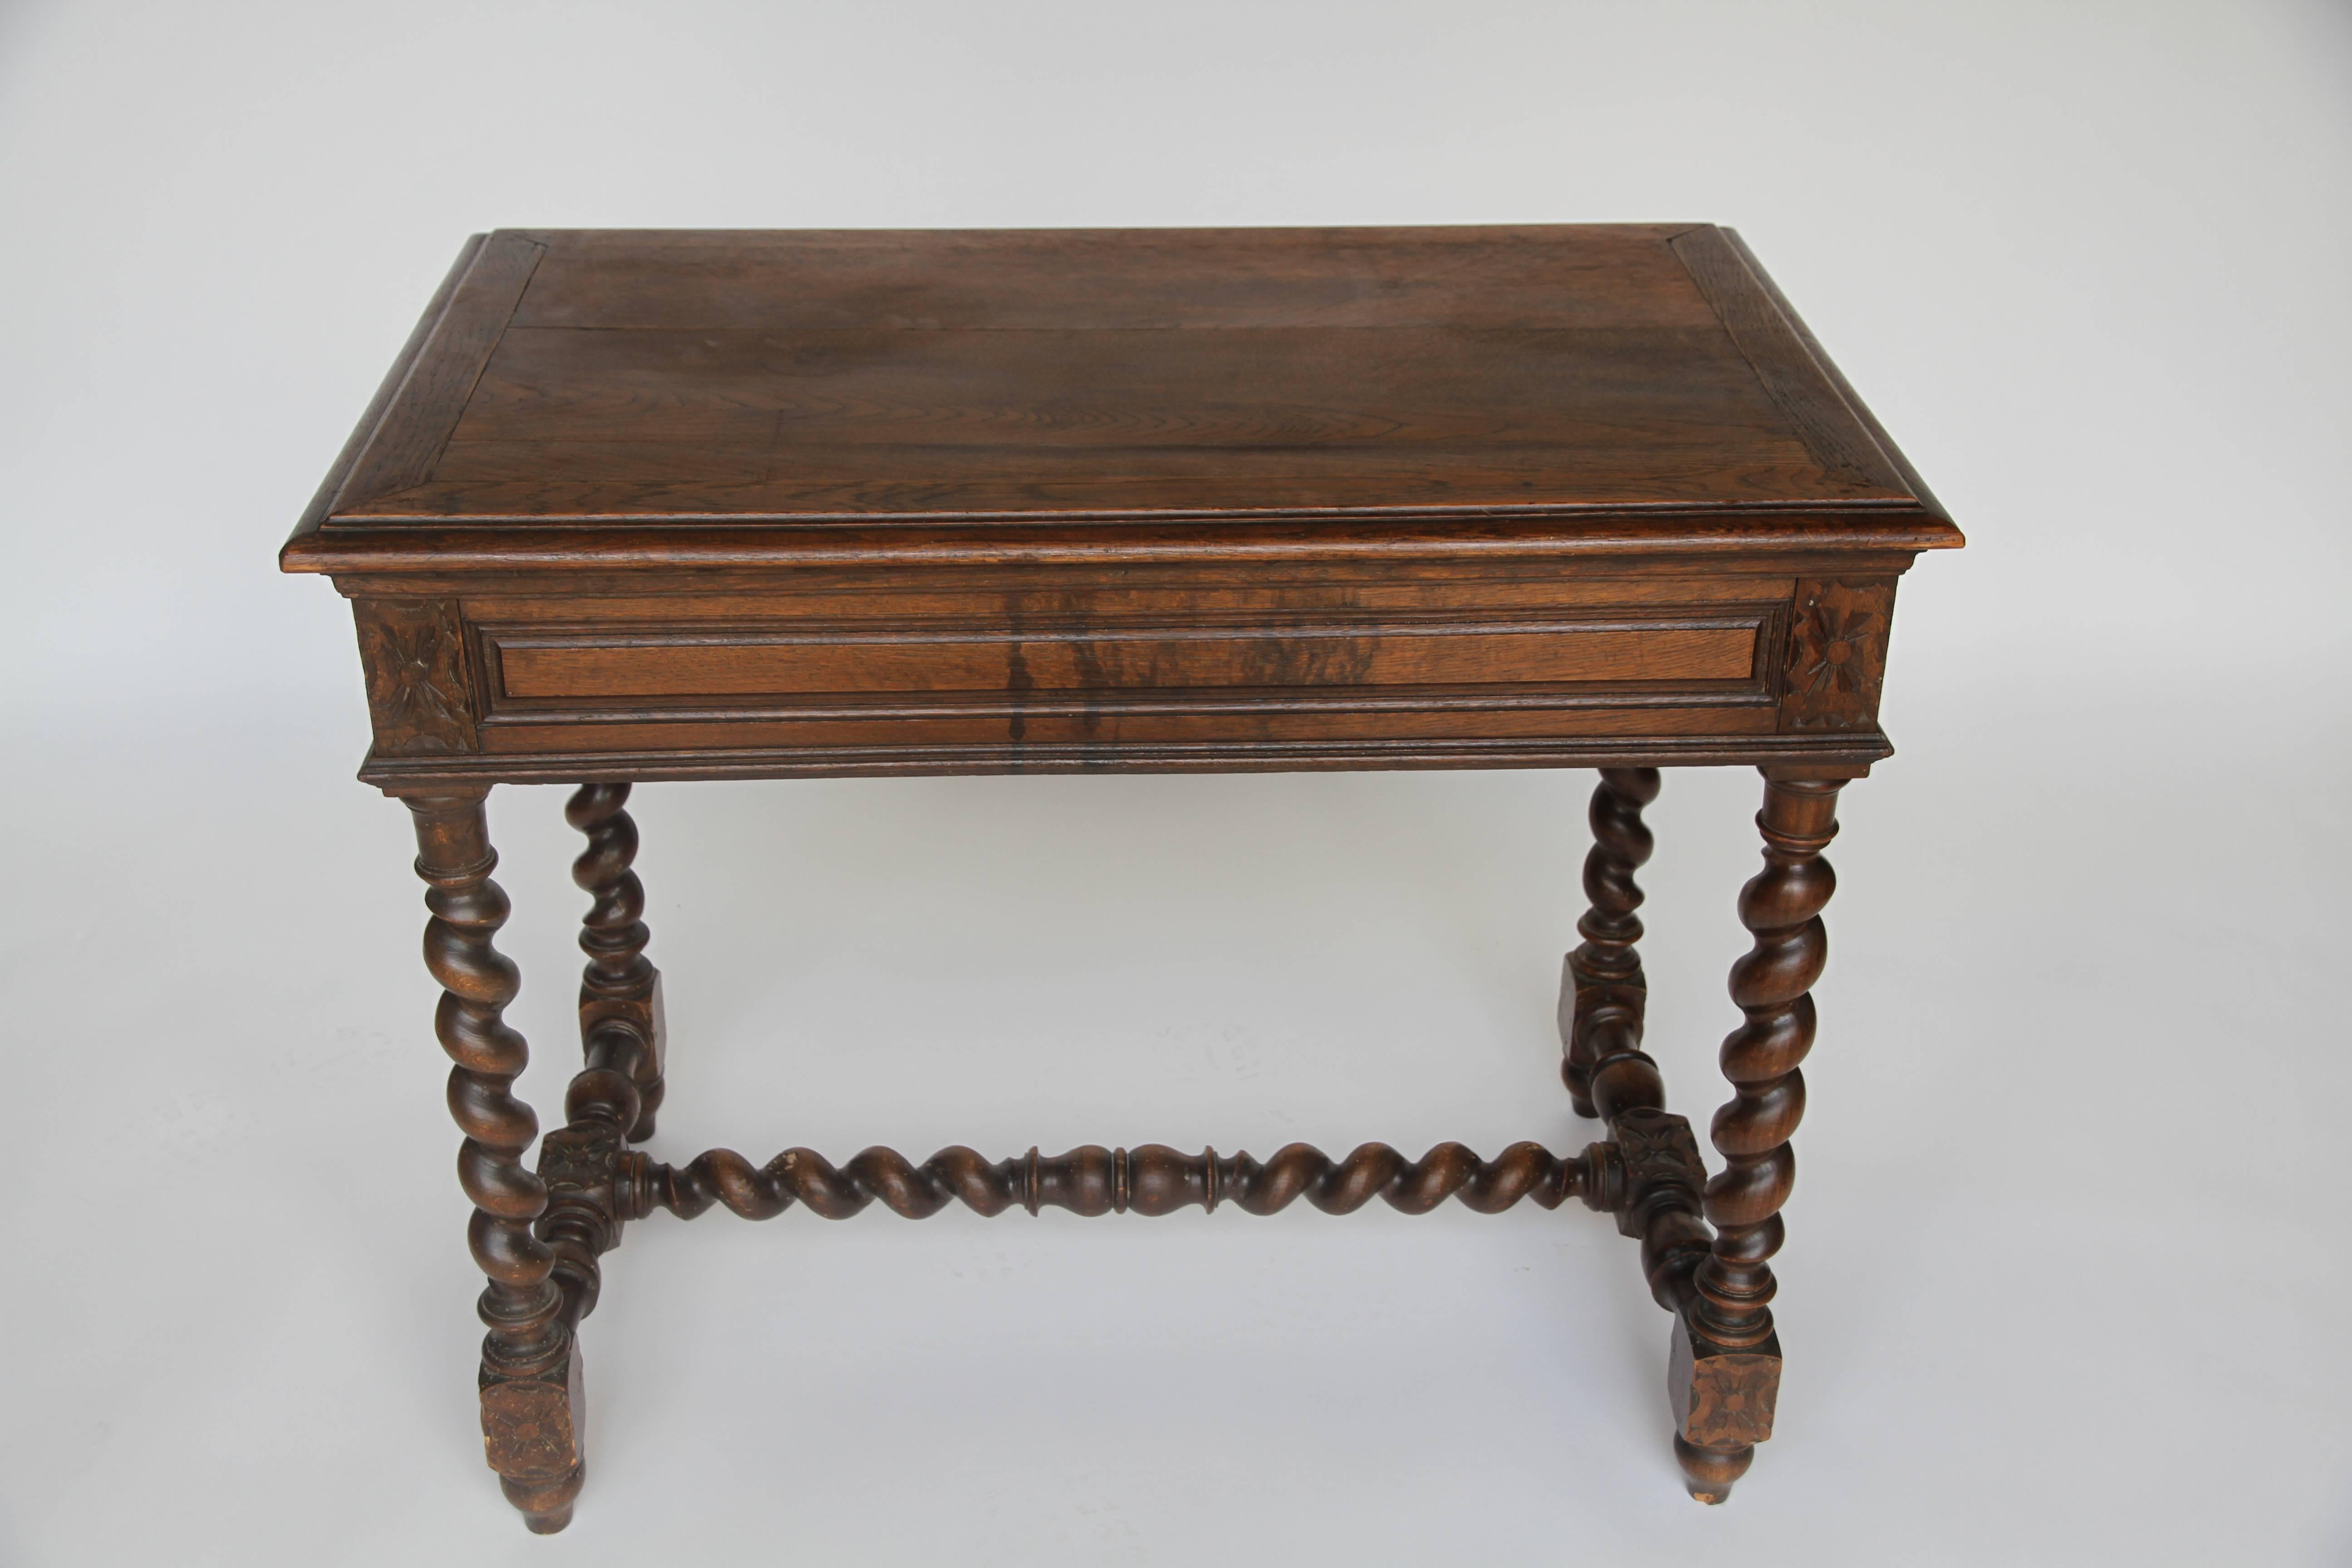 A beautiful oak carved twist leg table with one drawer, circa late 1800s. This table could be used as a small desk, entry piece or end table.
The carving and twist leg of the piece add great texture as well as visual beauty. A great accent piece.